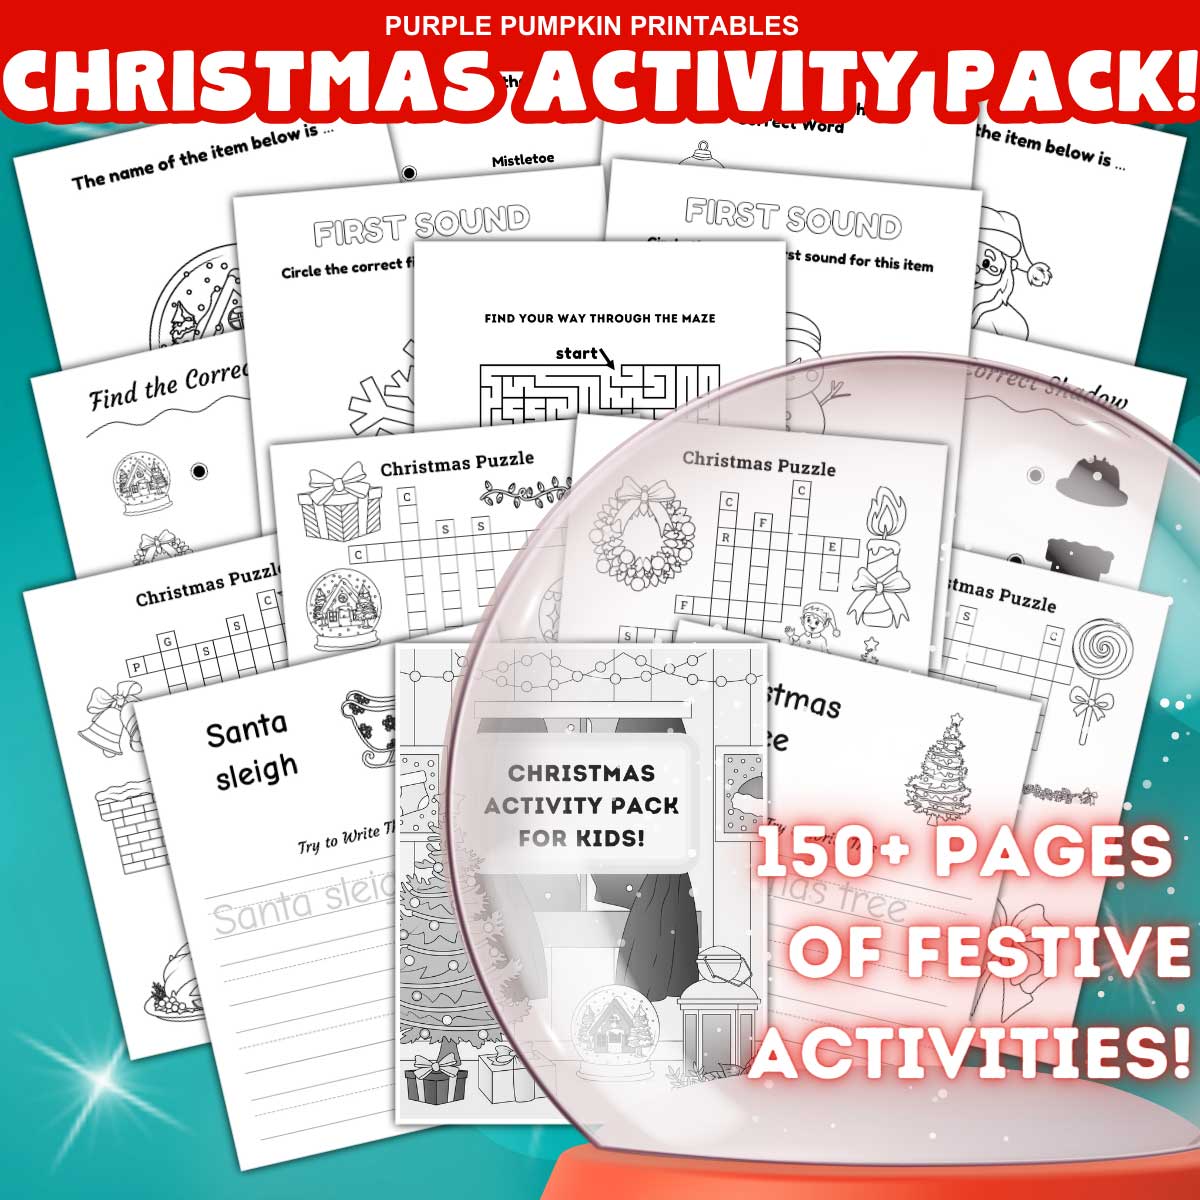 Printable Christmas Activity Pack for Kids!